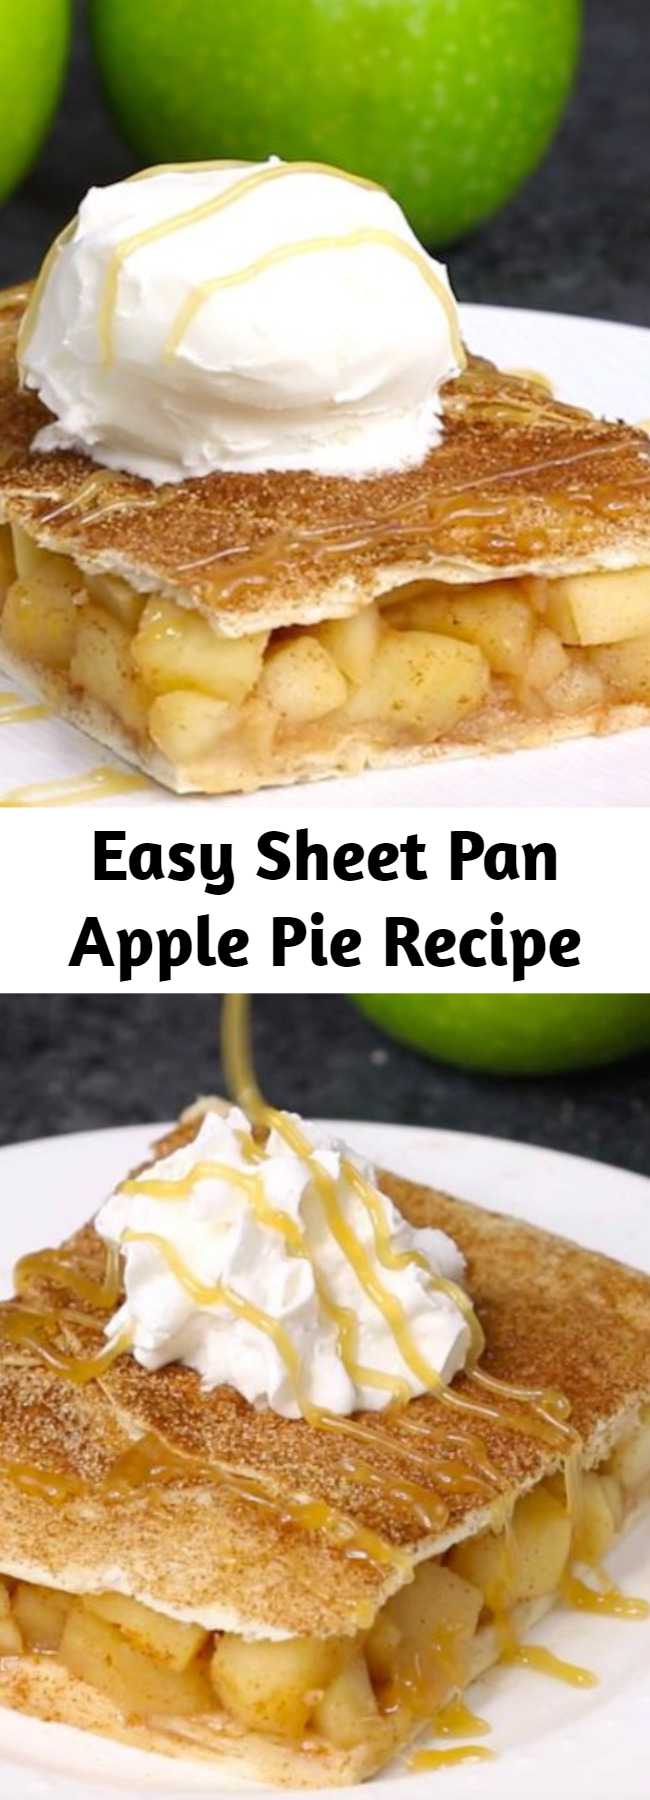 Easy Sheet Pan Apple Pie Recipe - Sheet Pan Apple Pie Bake is perfect when you need a dessert to feed a crowd at a party or the entire family. It’s so much easier to make than traditional apple pie. It’s a slab pie made with a tortilla crust and baked in a sheet pan. This easy recipe takes just over half-an-hour and uses 6 ingredients! Serve it with ice cream, whipped cream or caramel sauce for an amazing dessert!